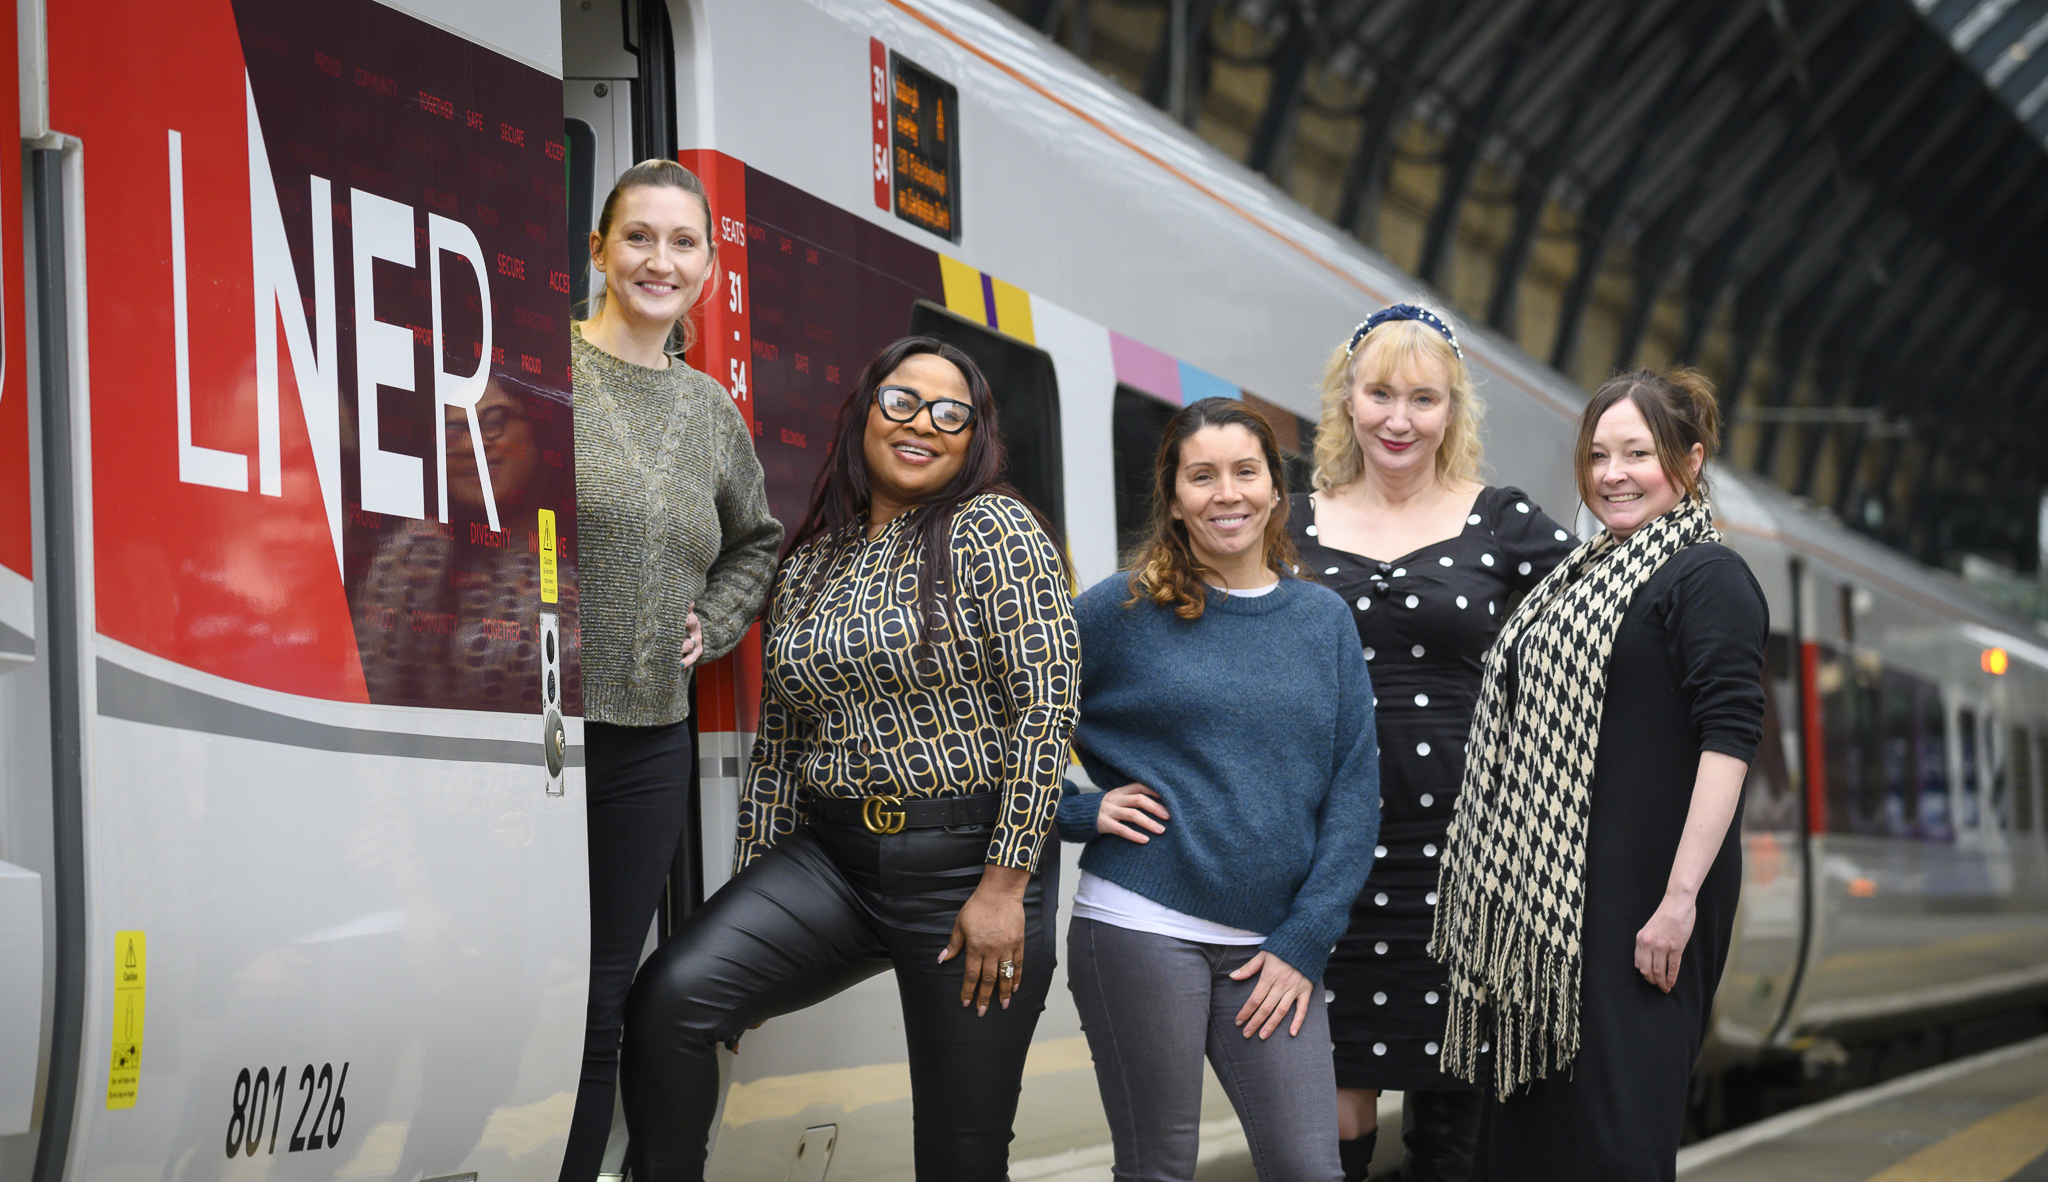 Never Mind The Gap Showcases Career Opportunities In Rail